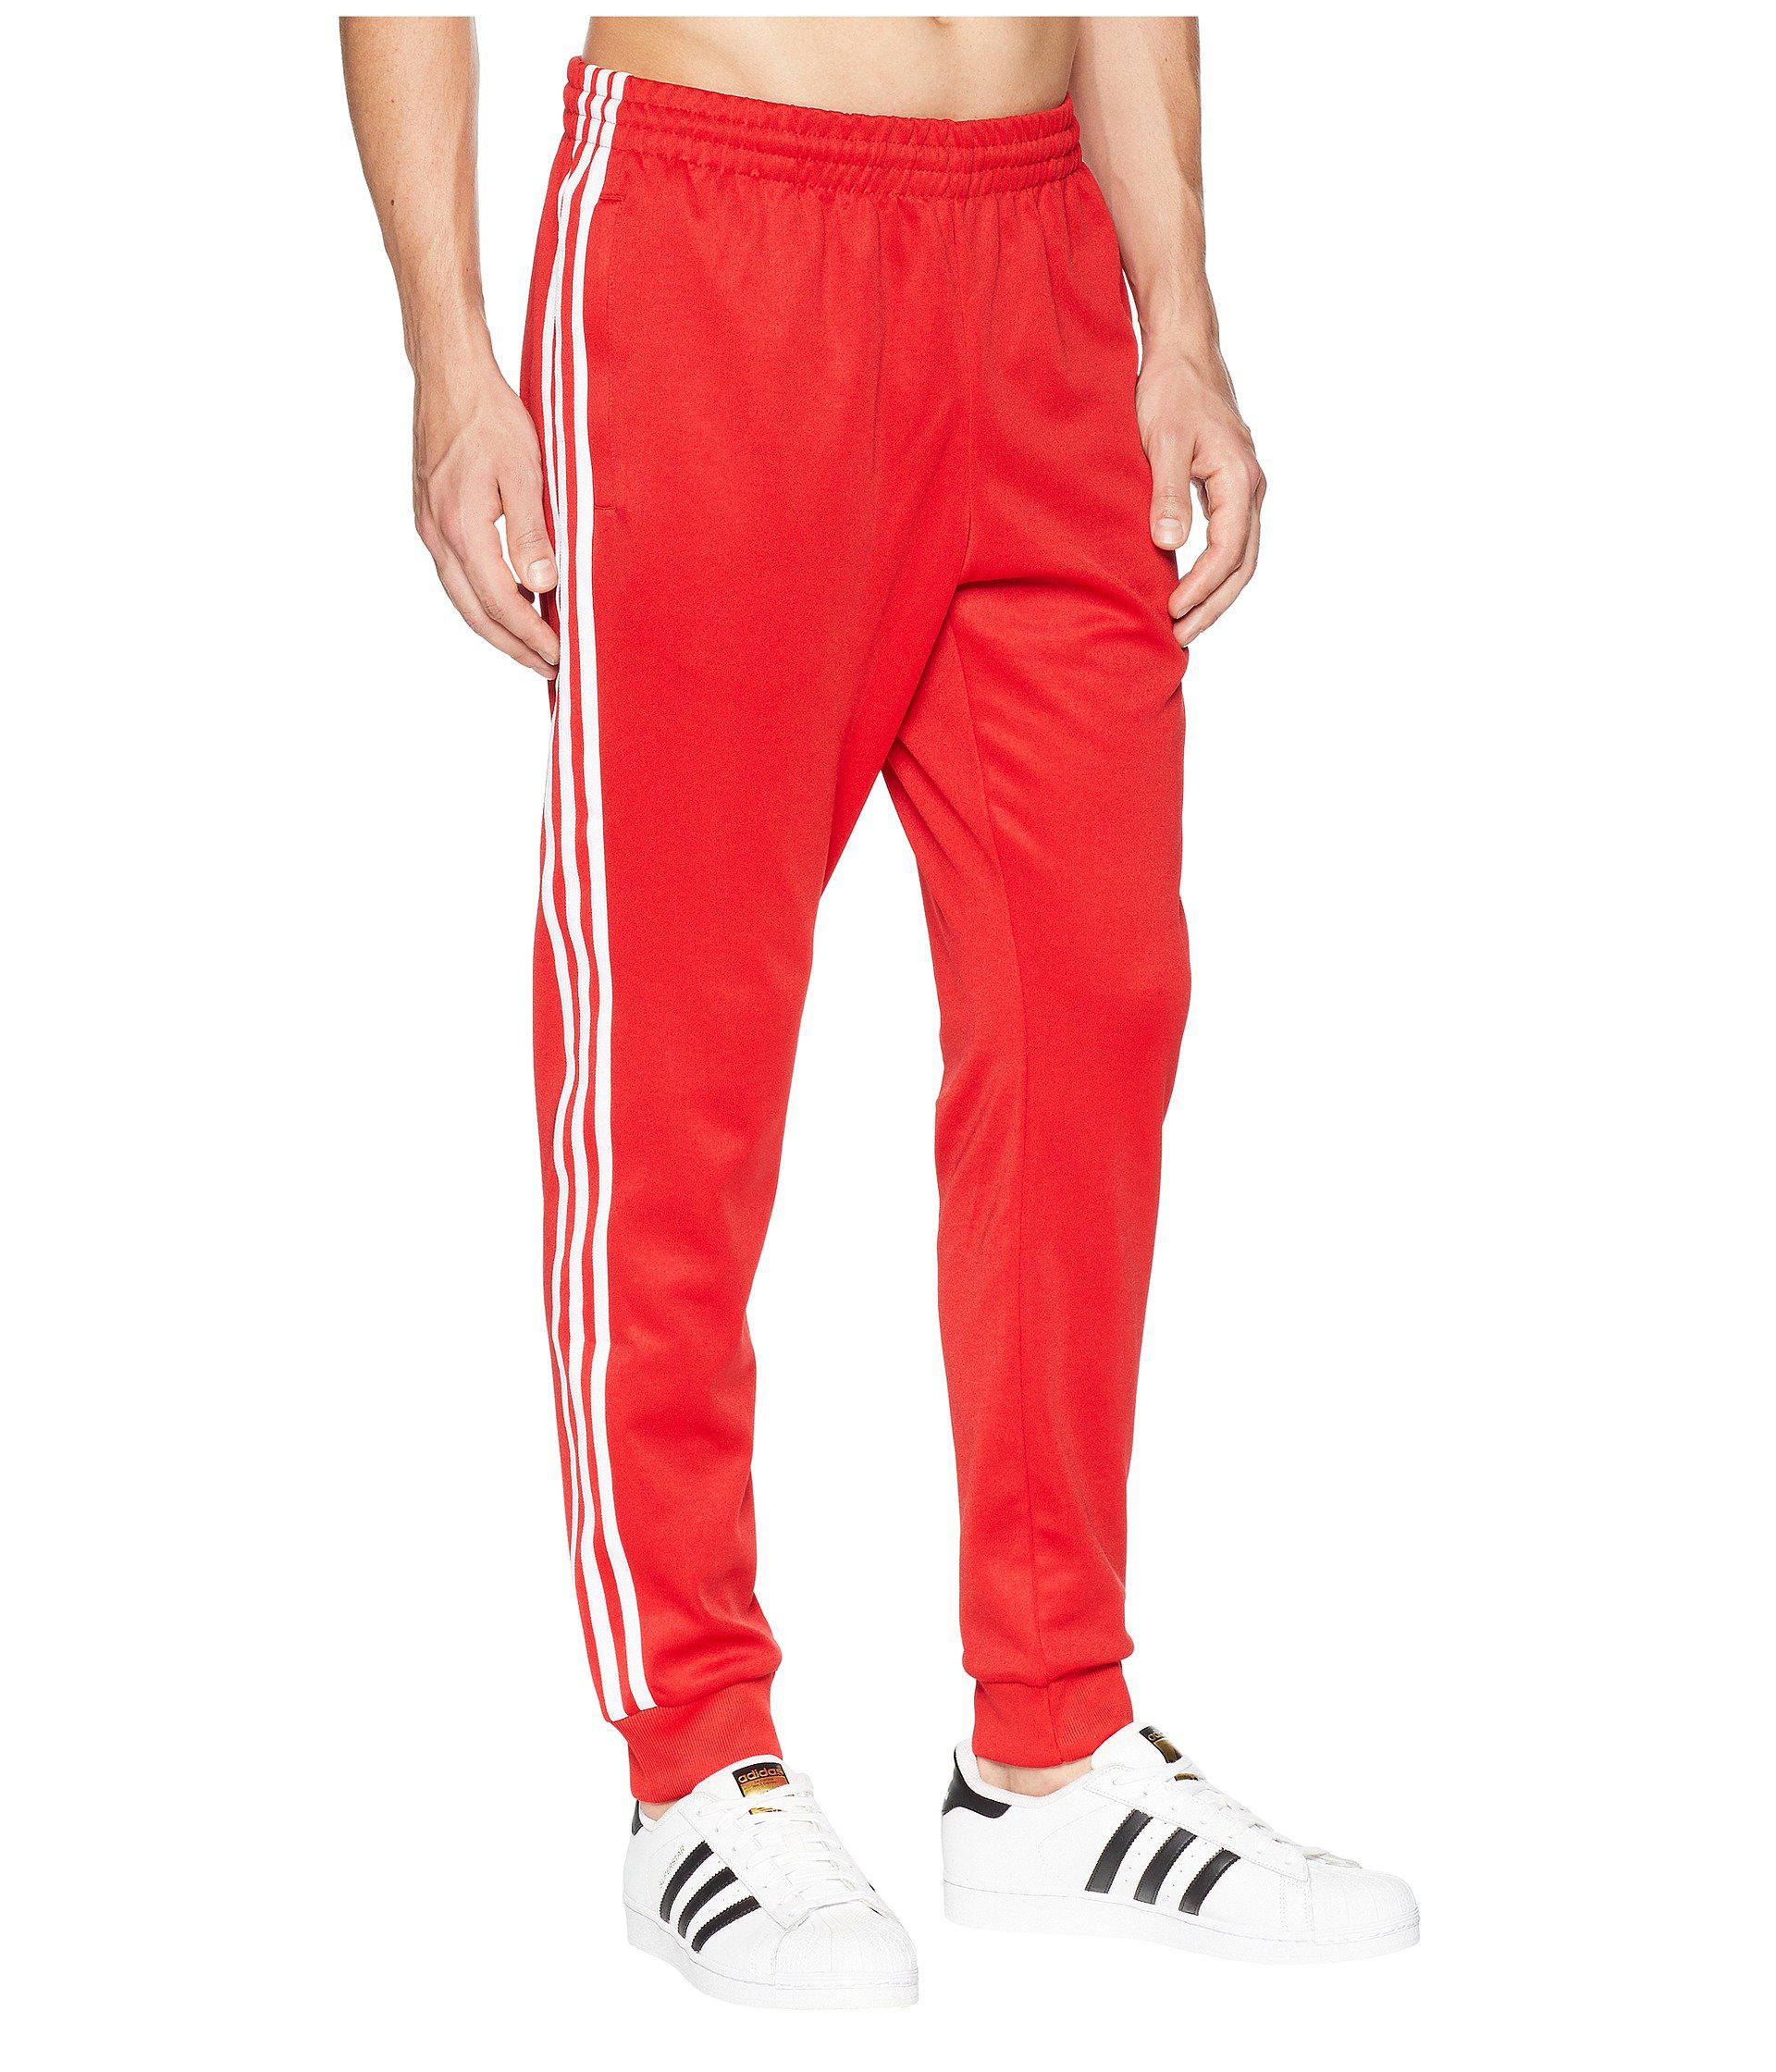 Red Adidas Sst Track Pants Top Sellers, SAVE 36% - mpgc.net